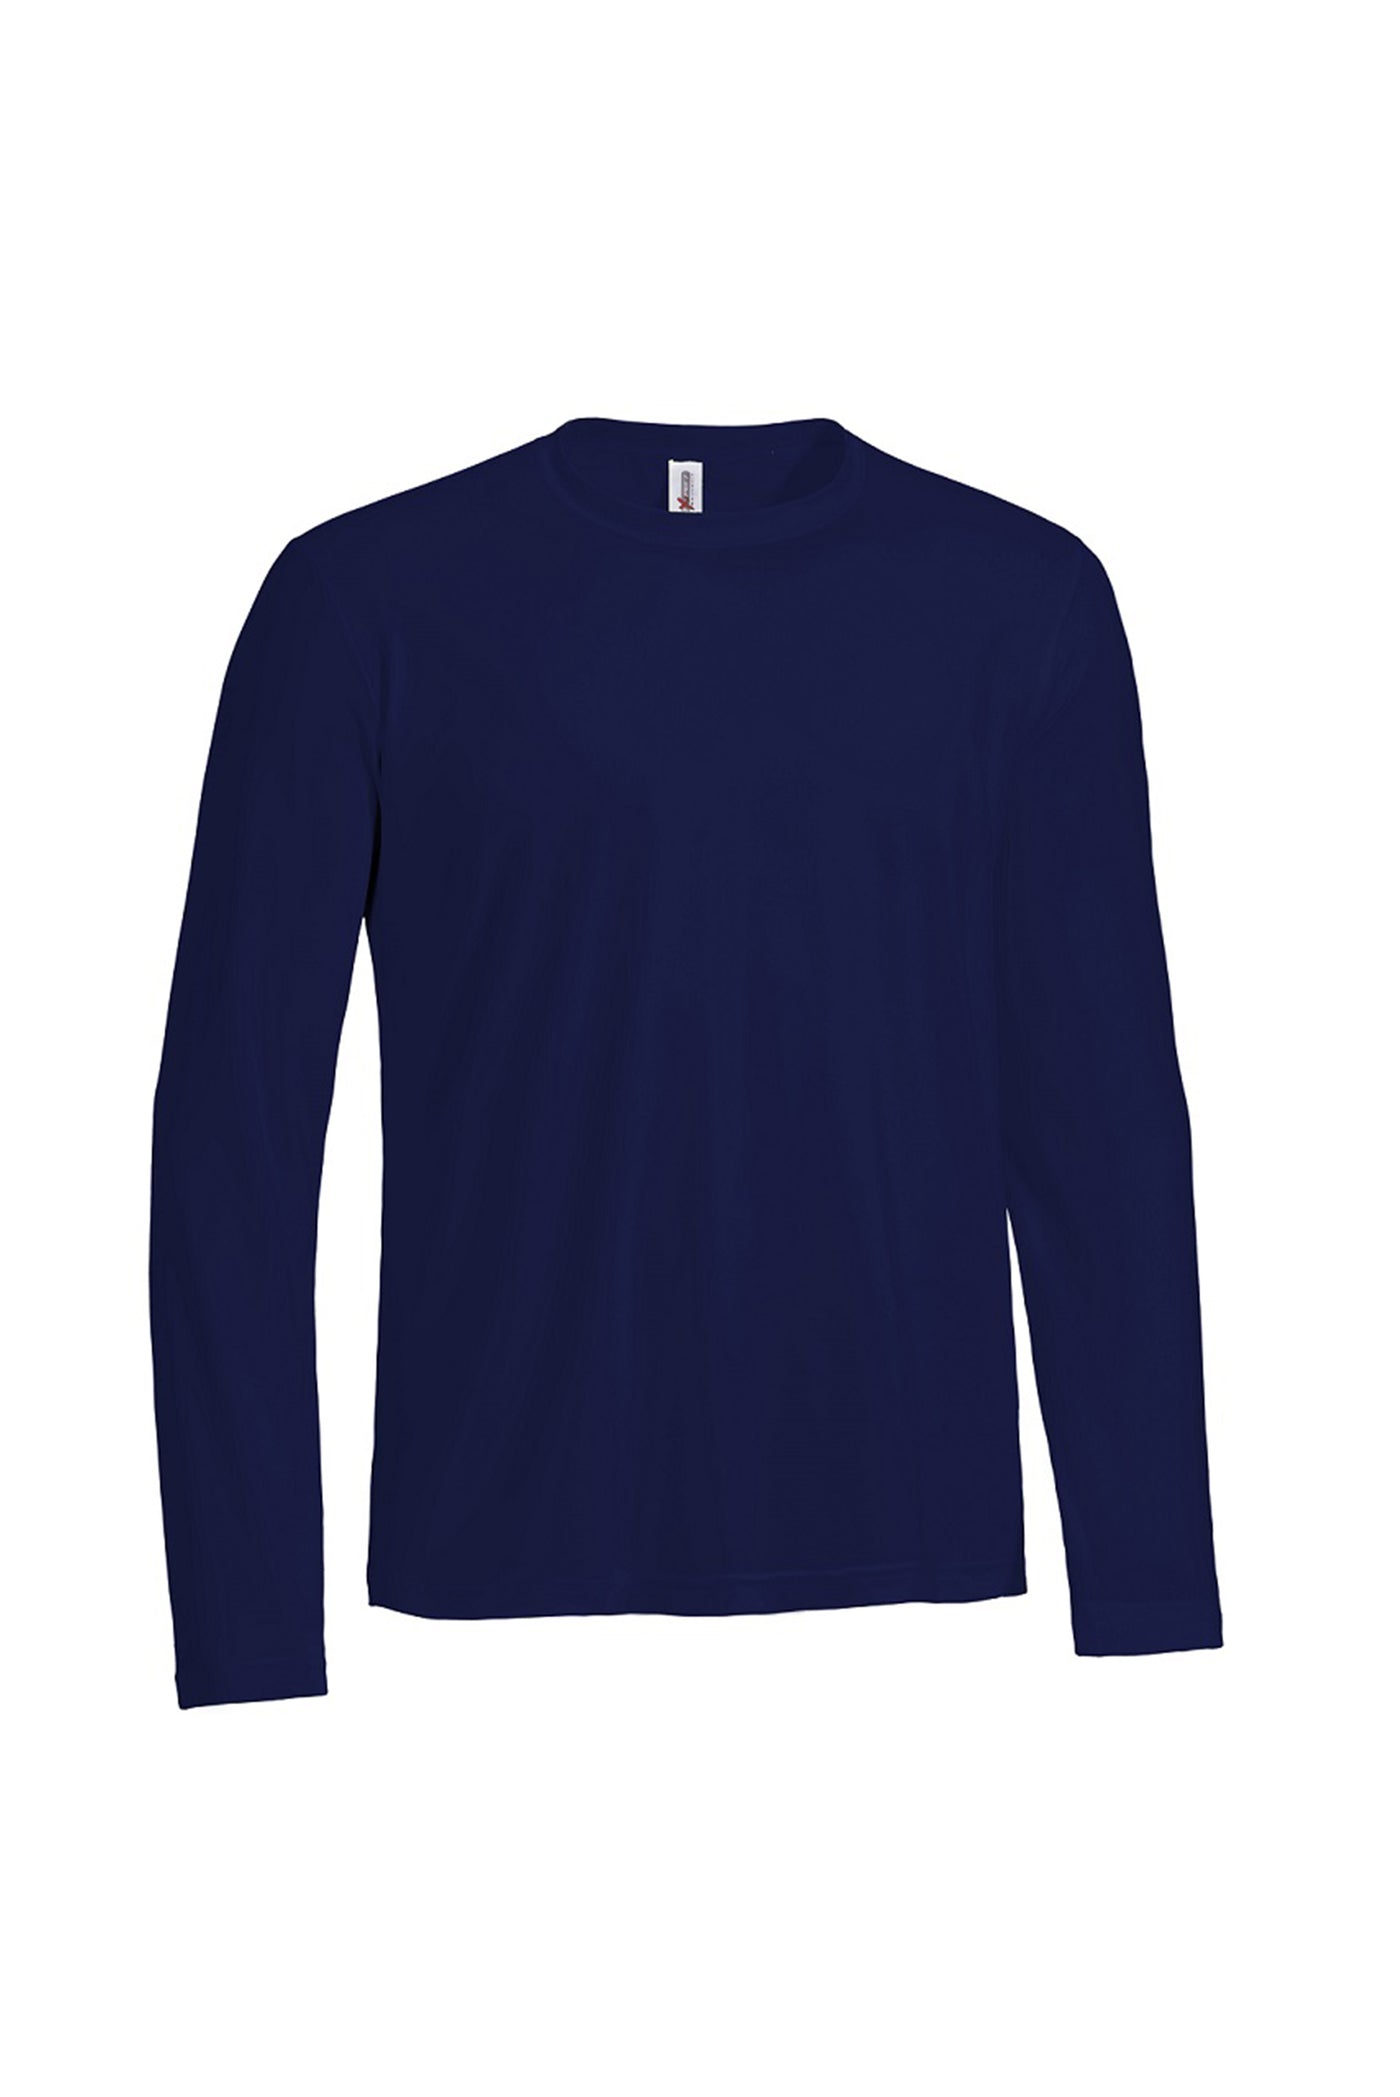 Expert Apparel Men's Natural Feel Jersey Long Sleeve Crewneck in Navy Made in USA#color_navy